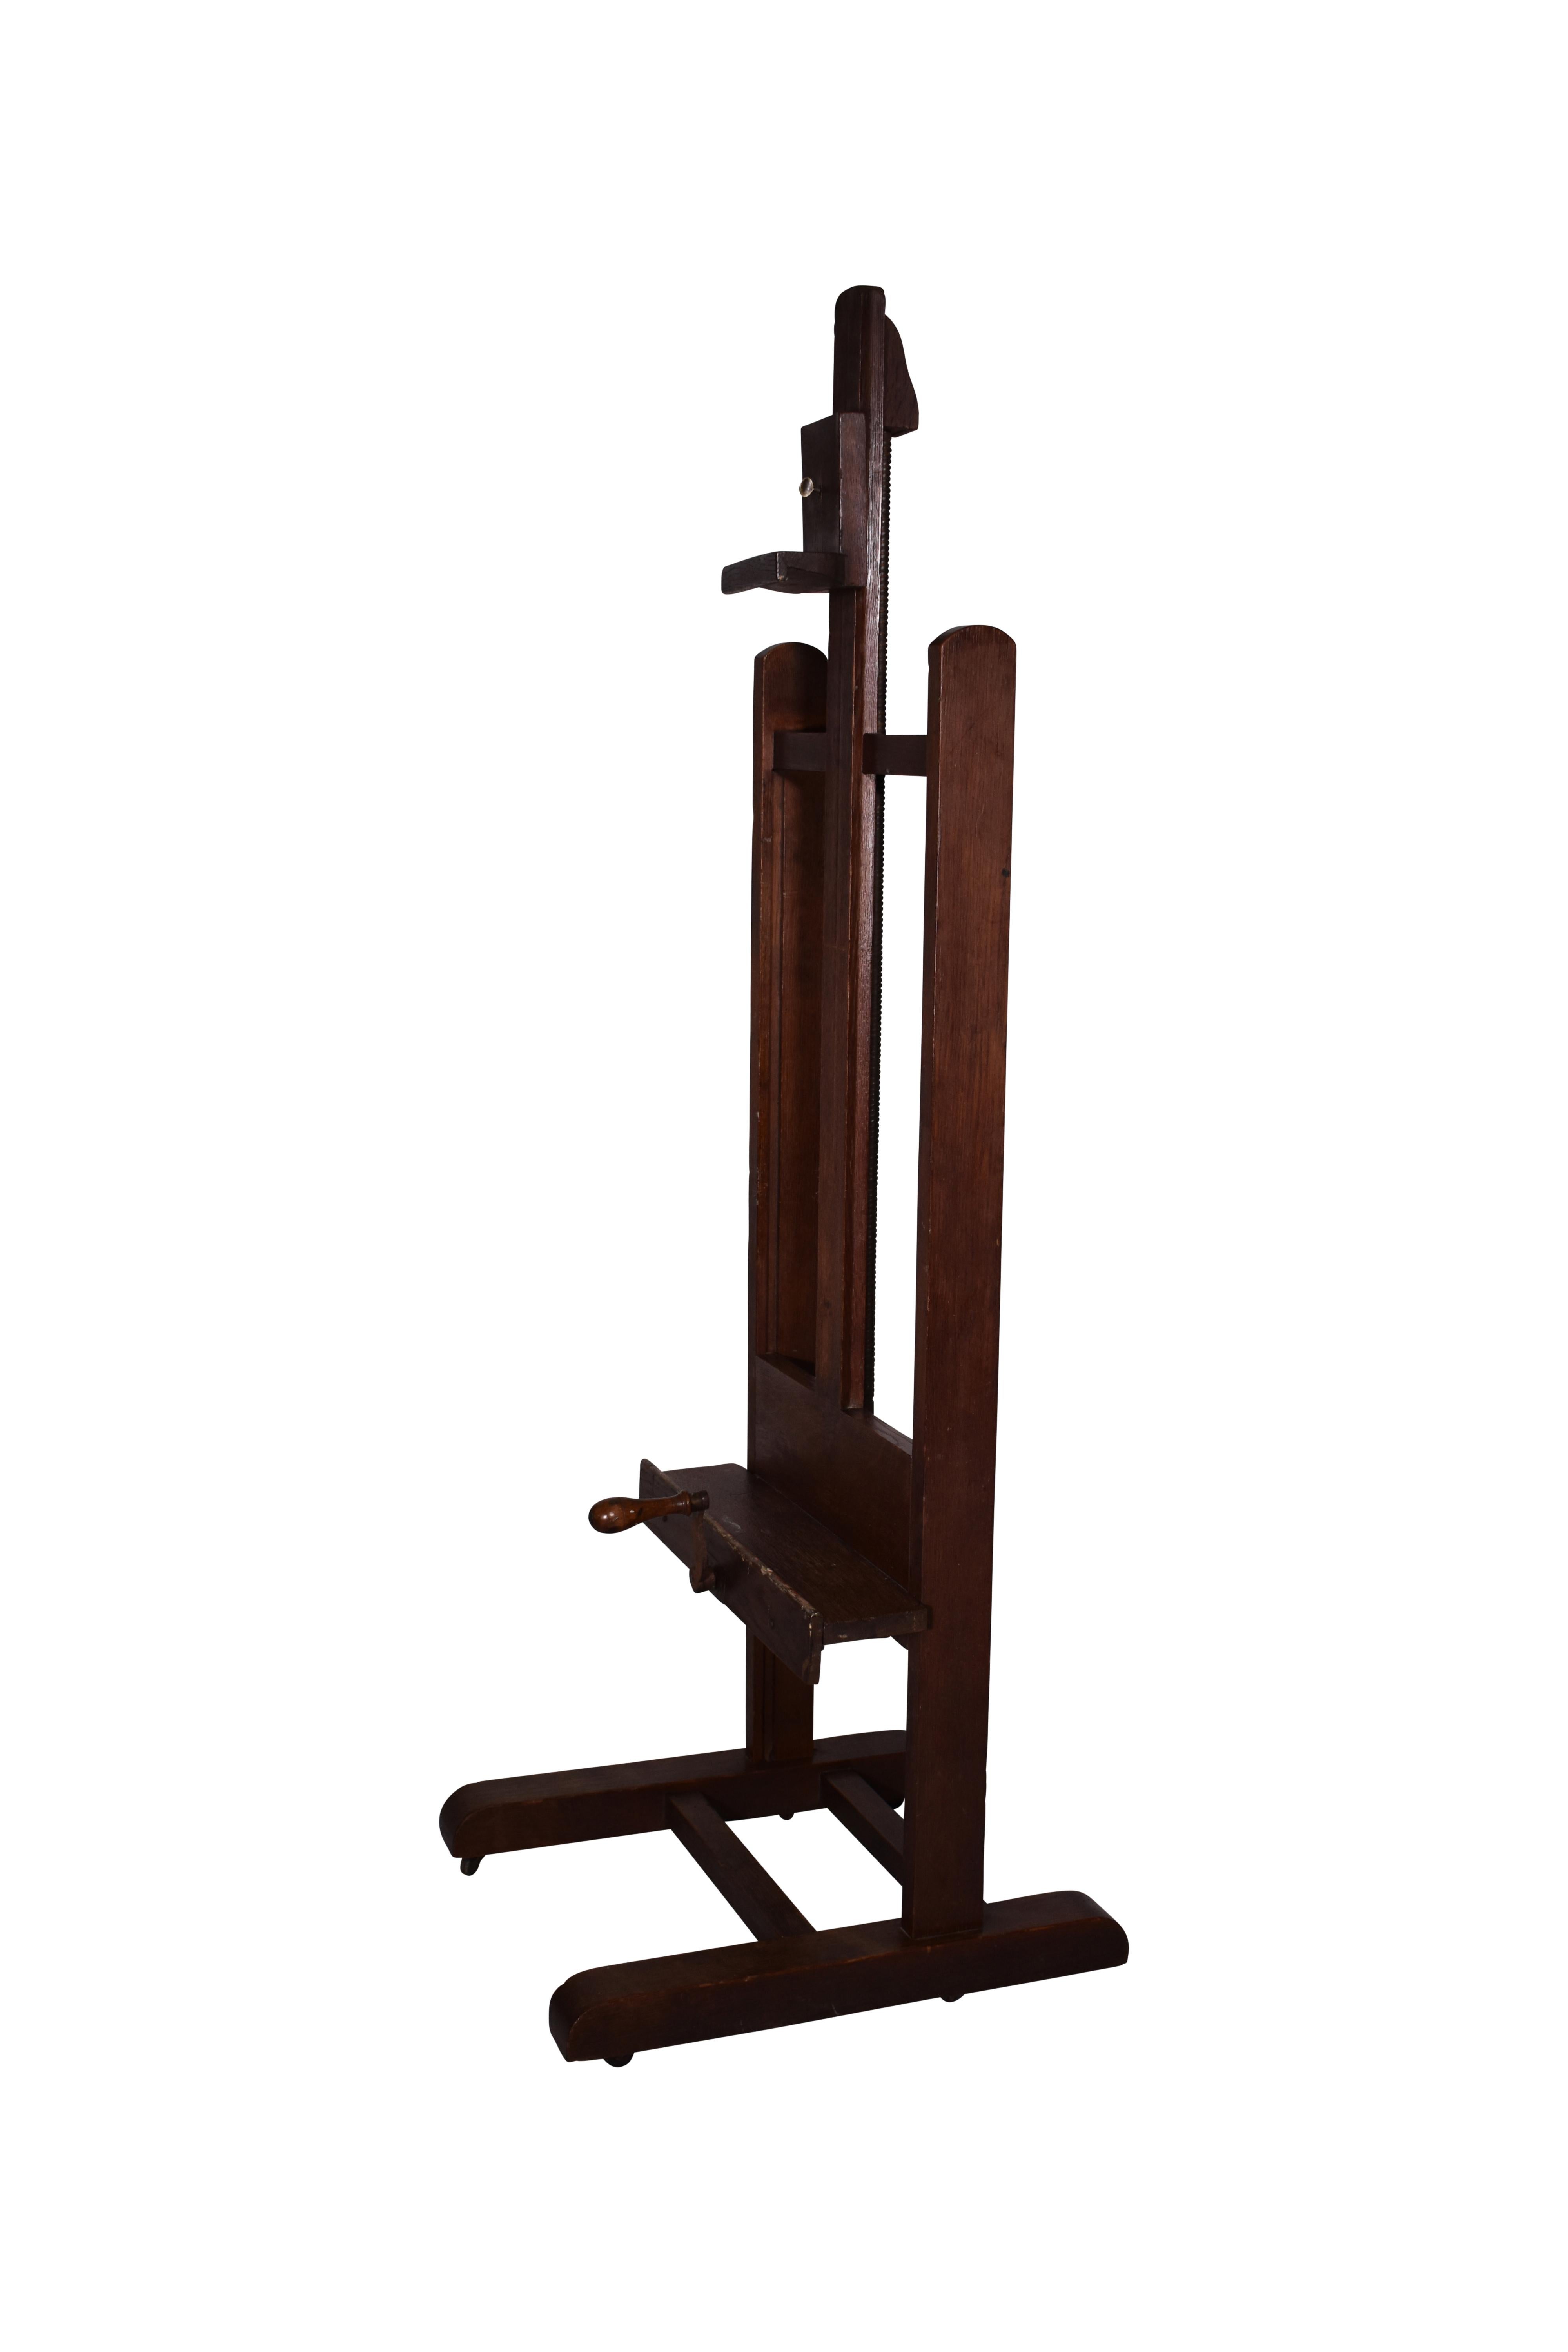 The perfect display for contemporary art with the juxtaposition of this well-proportioned antique easel.